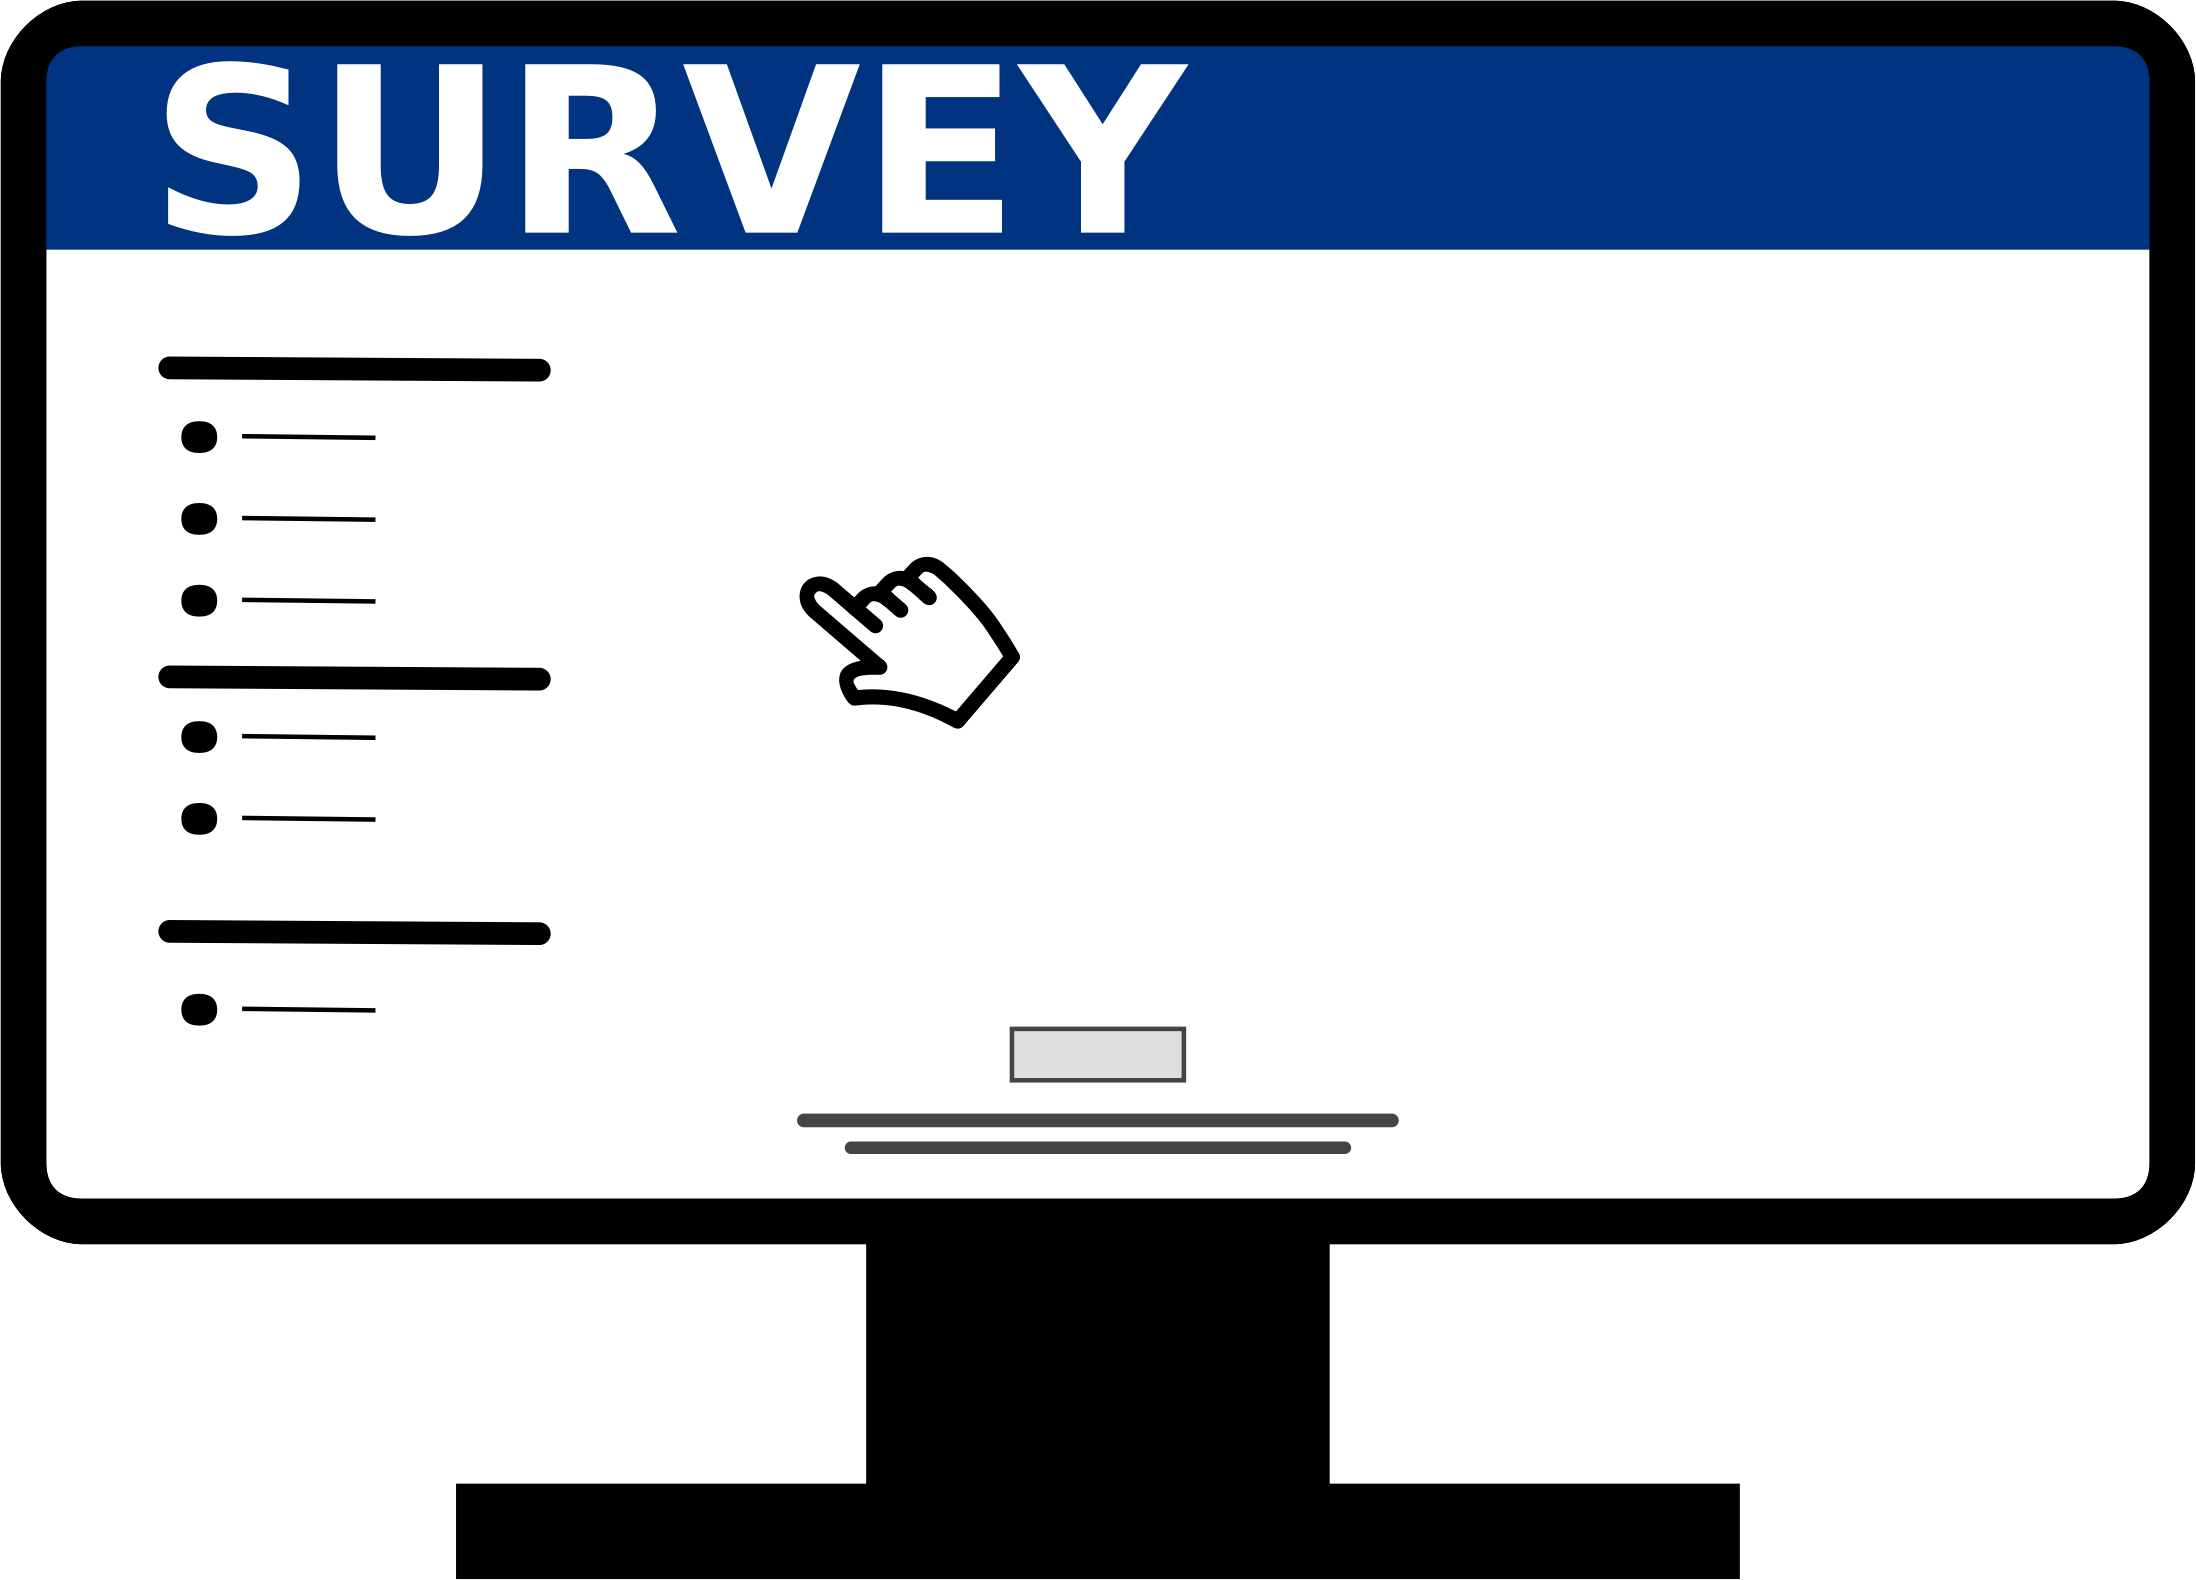 Asking Sensitive Survey Questions - Welcome to the ...